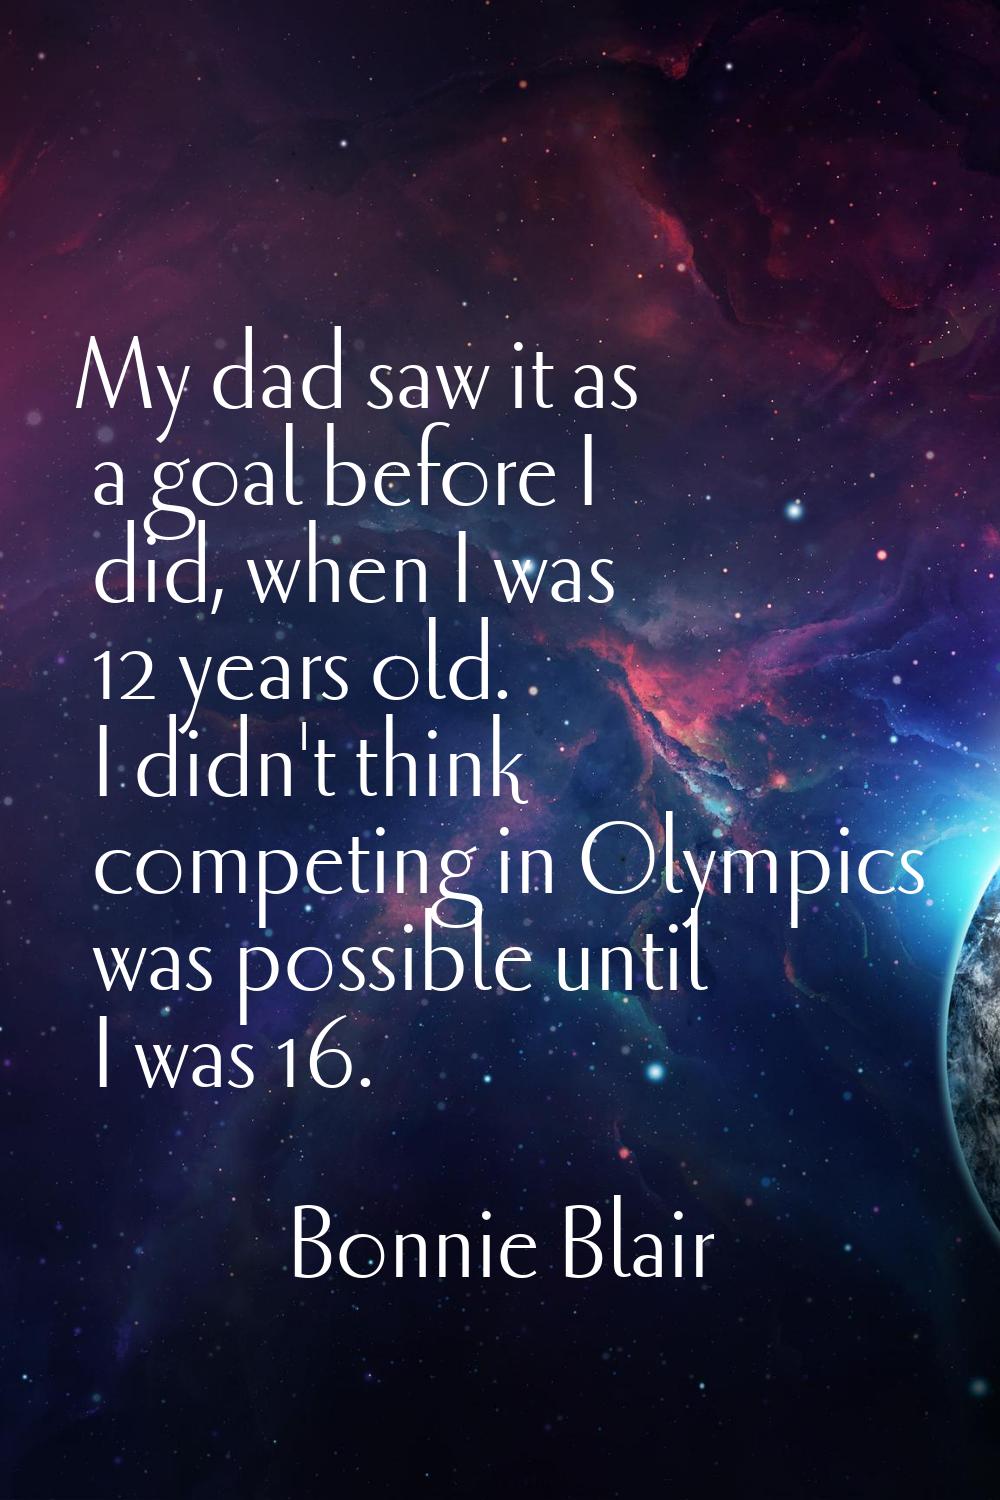 My dad saw it as a goal before I did, when I was 12 years old. I didn't think competing in Olympics